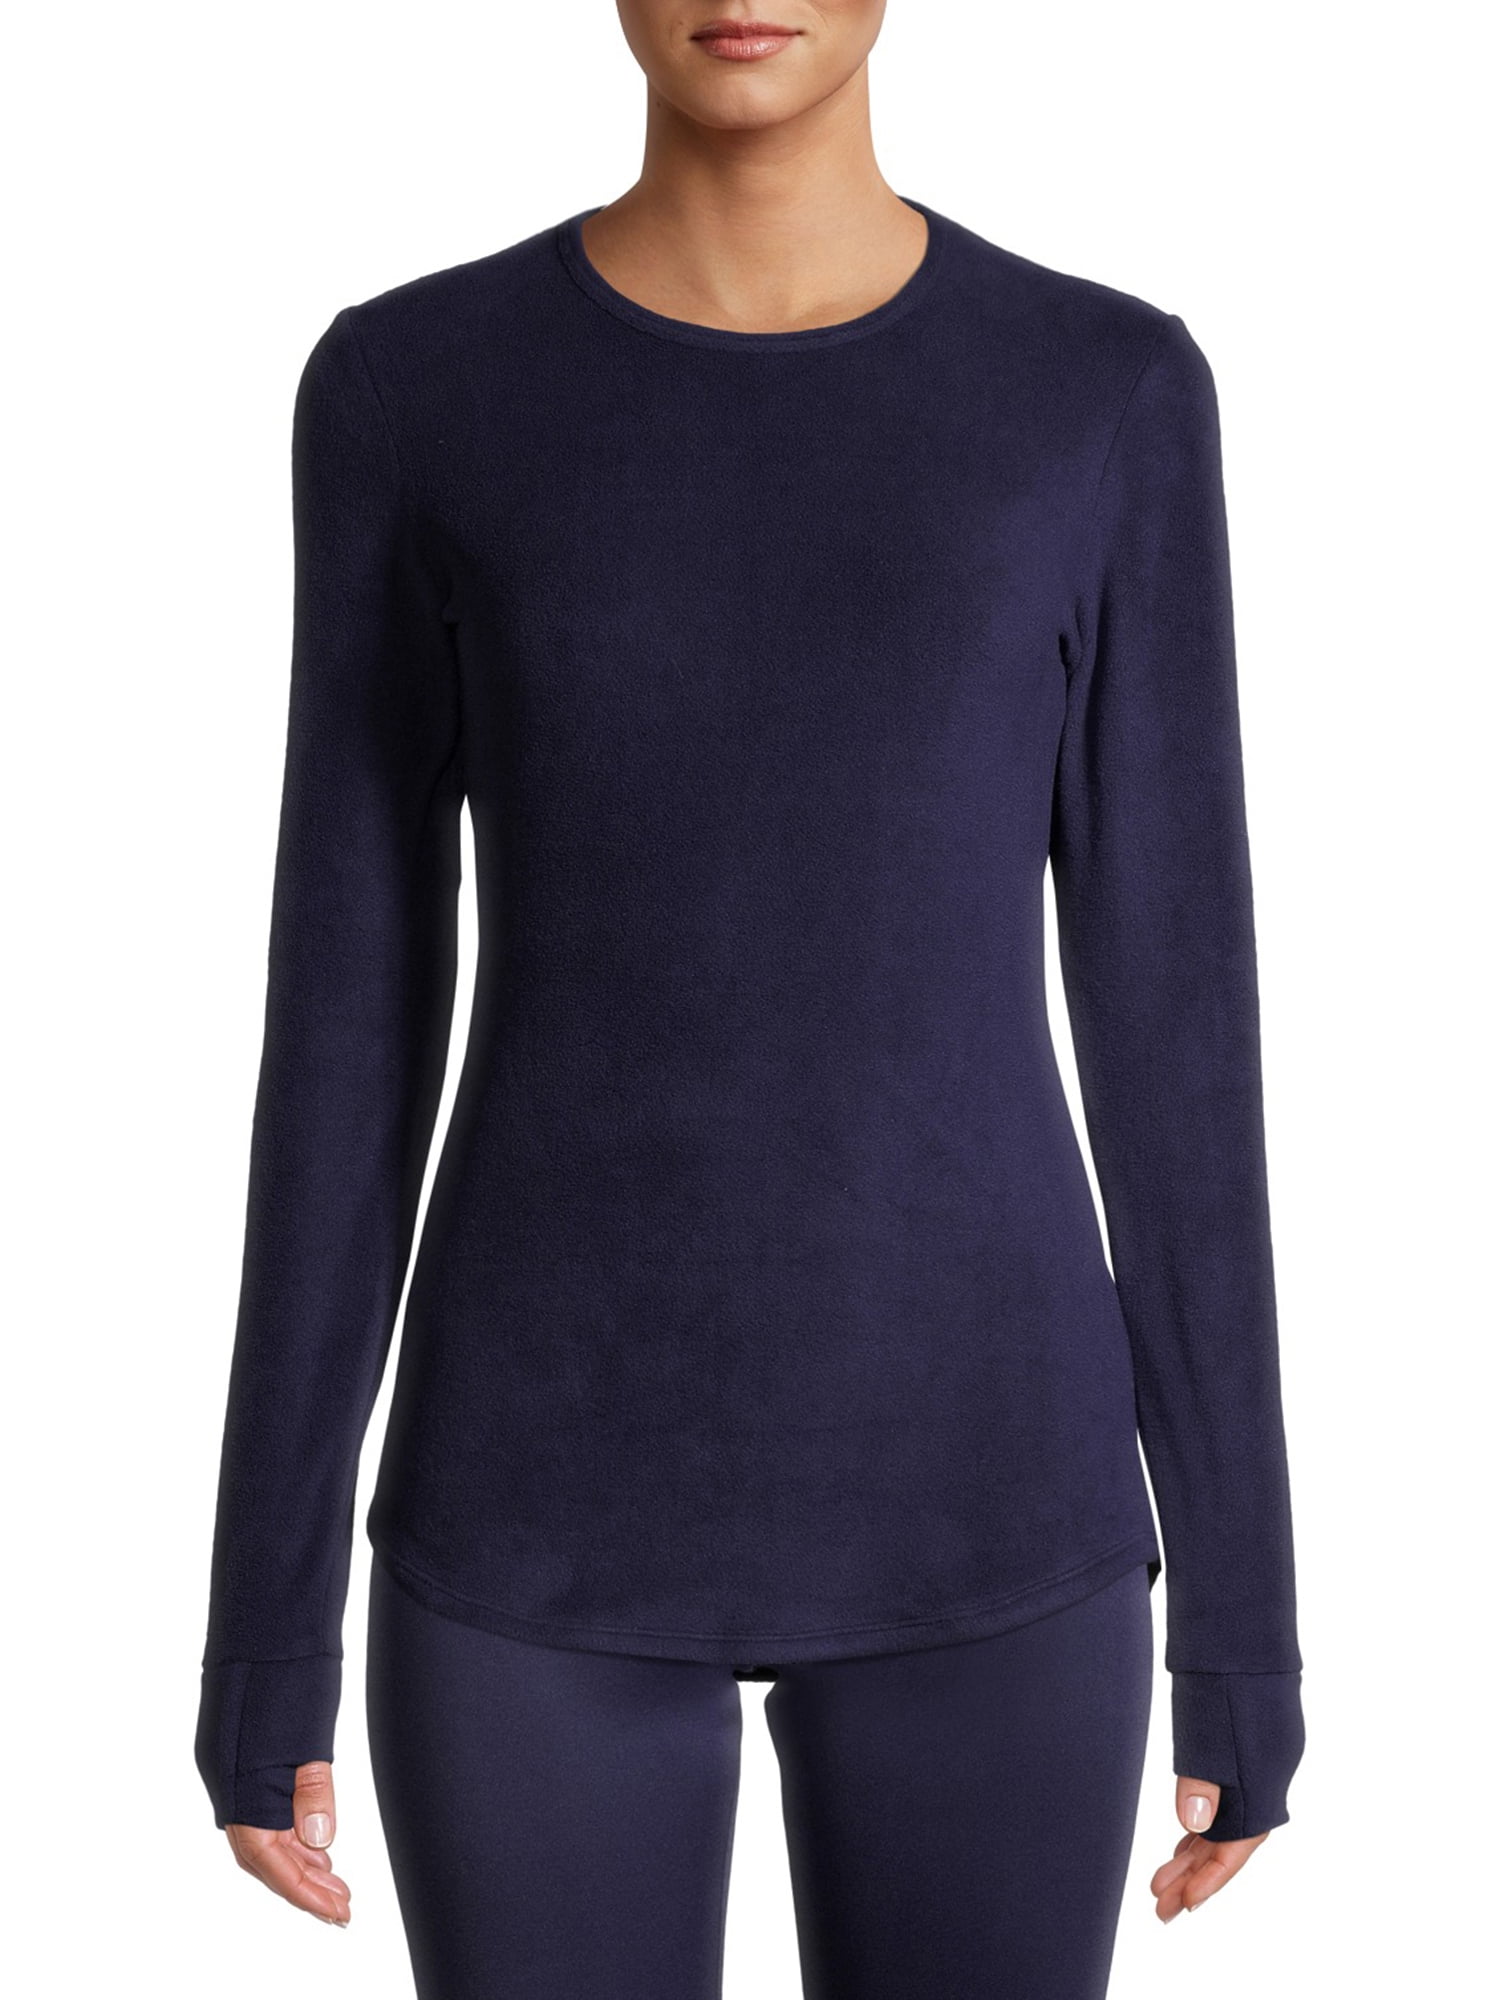 ClimateRight by Cuddl Duds Women's Stretch Fleece Base Layer Crewneck  Thermal Top with Cuff Thumbhole 